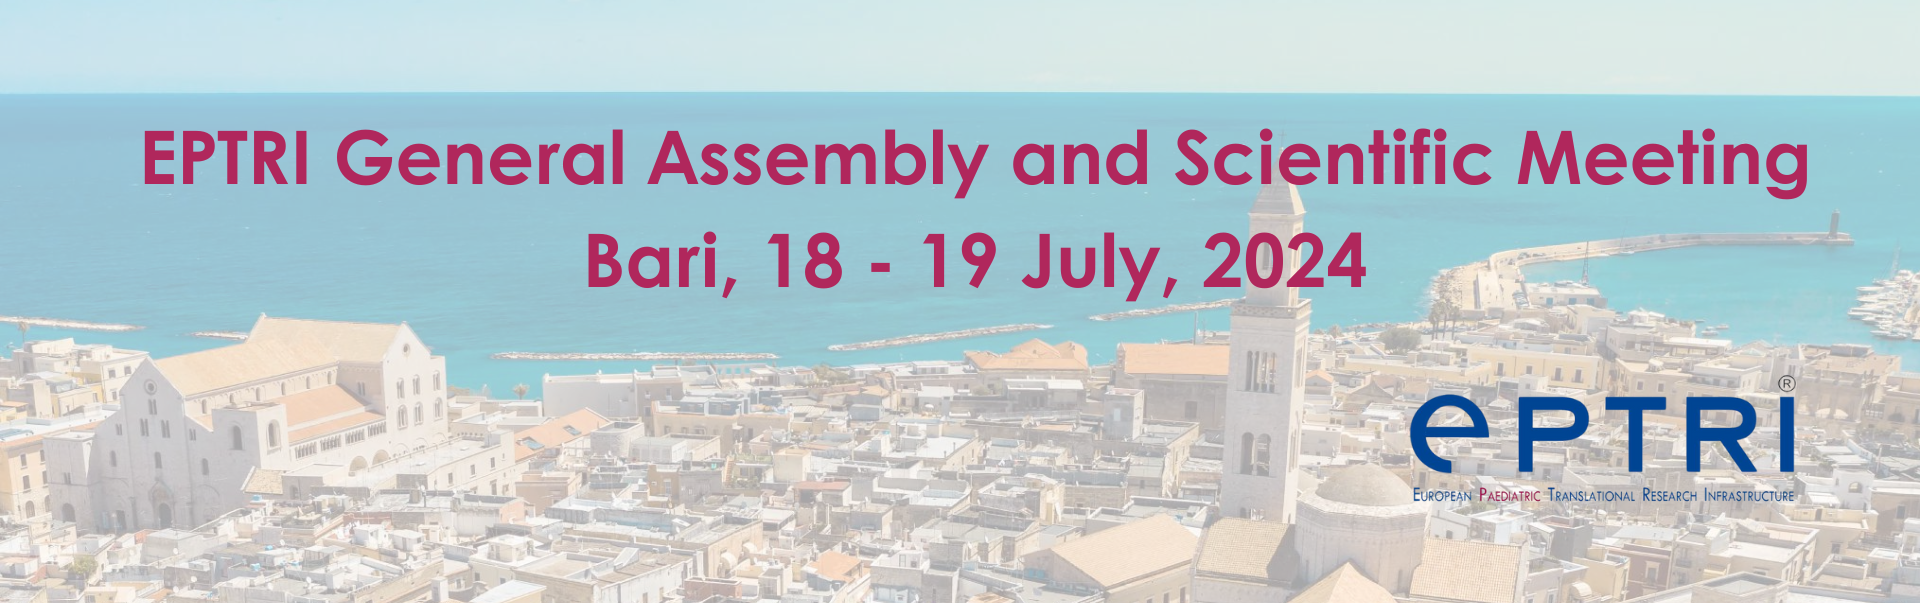 EPTRI General Assembly and Scientific Meeting 2024